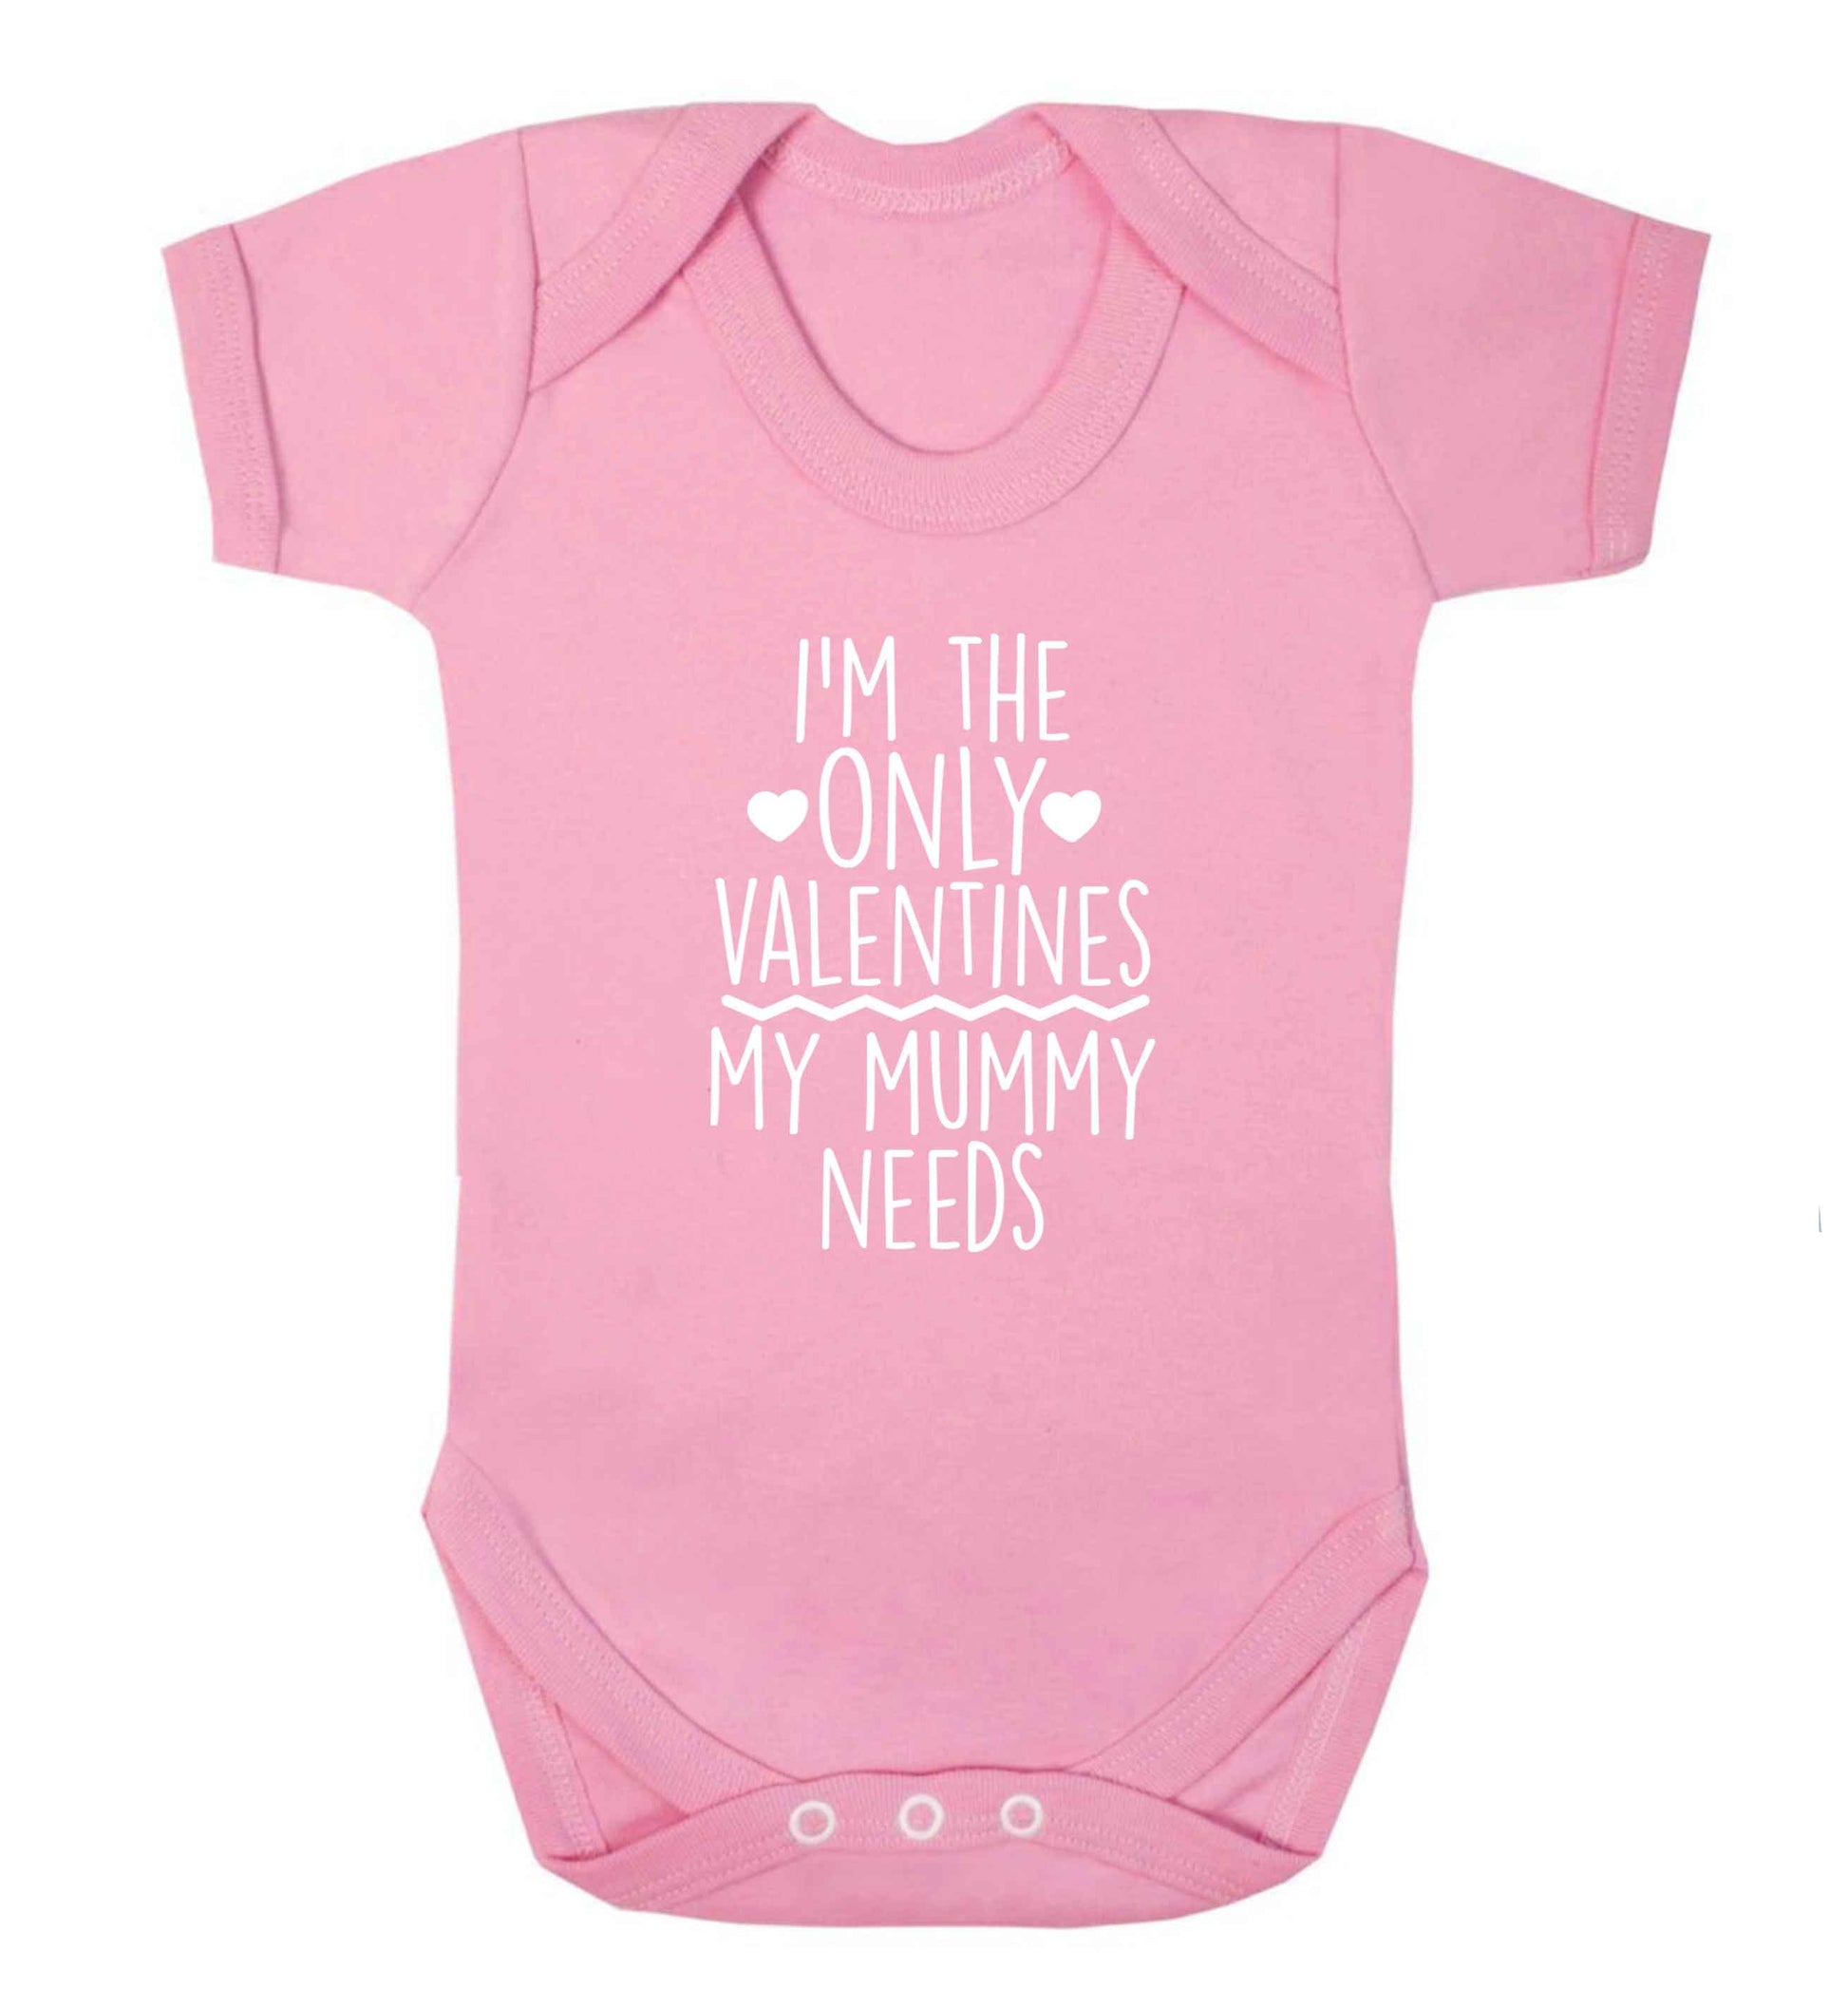 I'm the only valentines my mummy needs baby vest pale pink 18-24 months